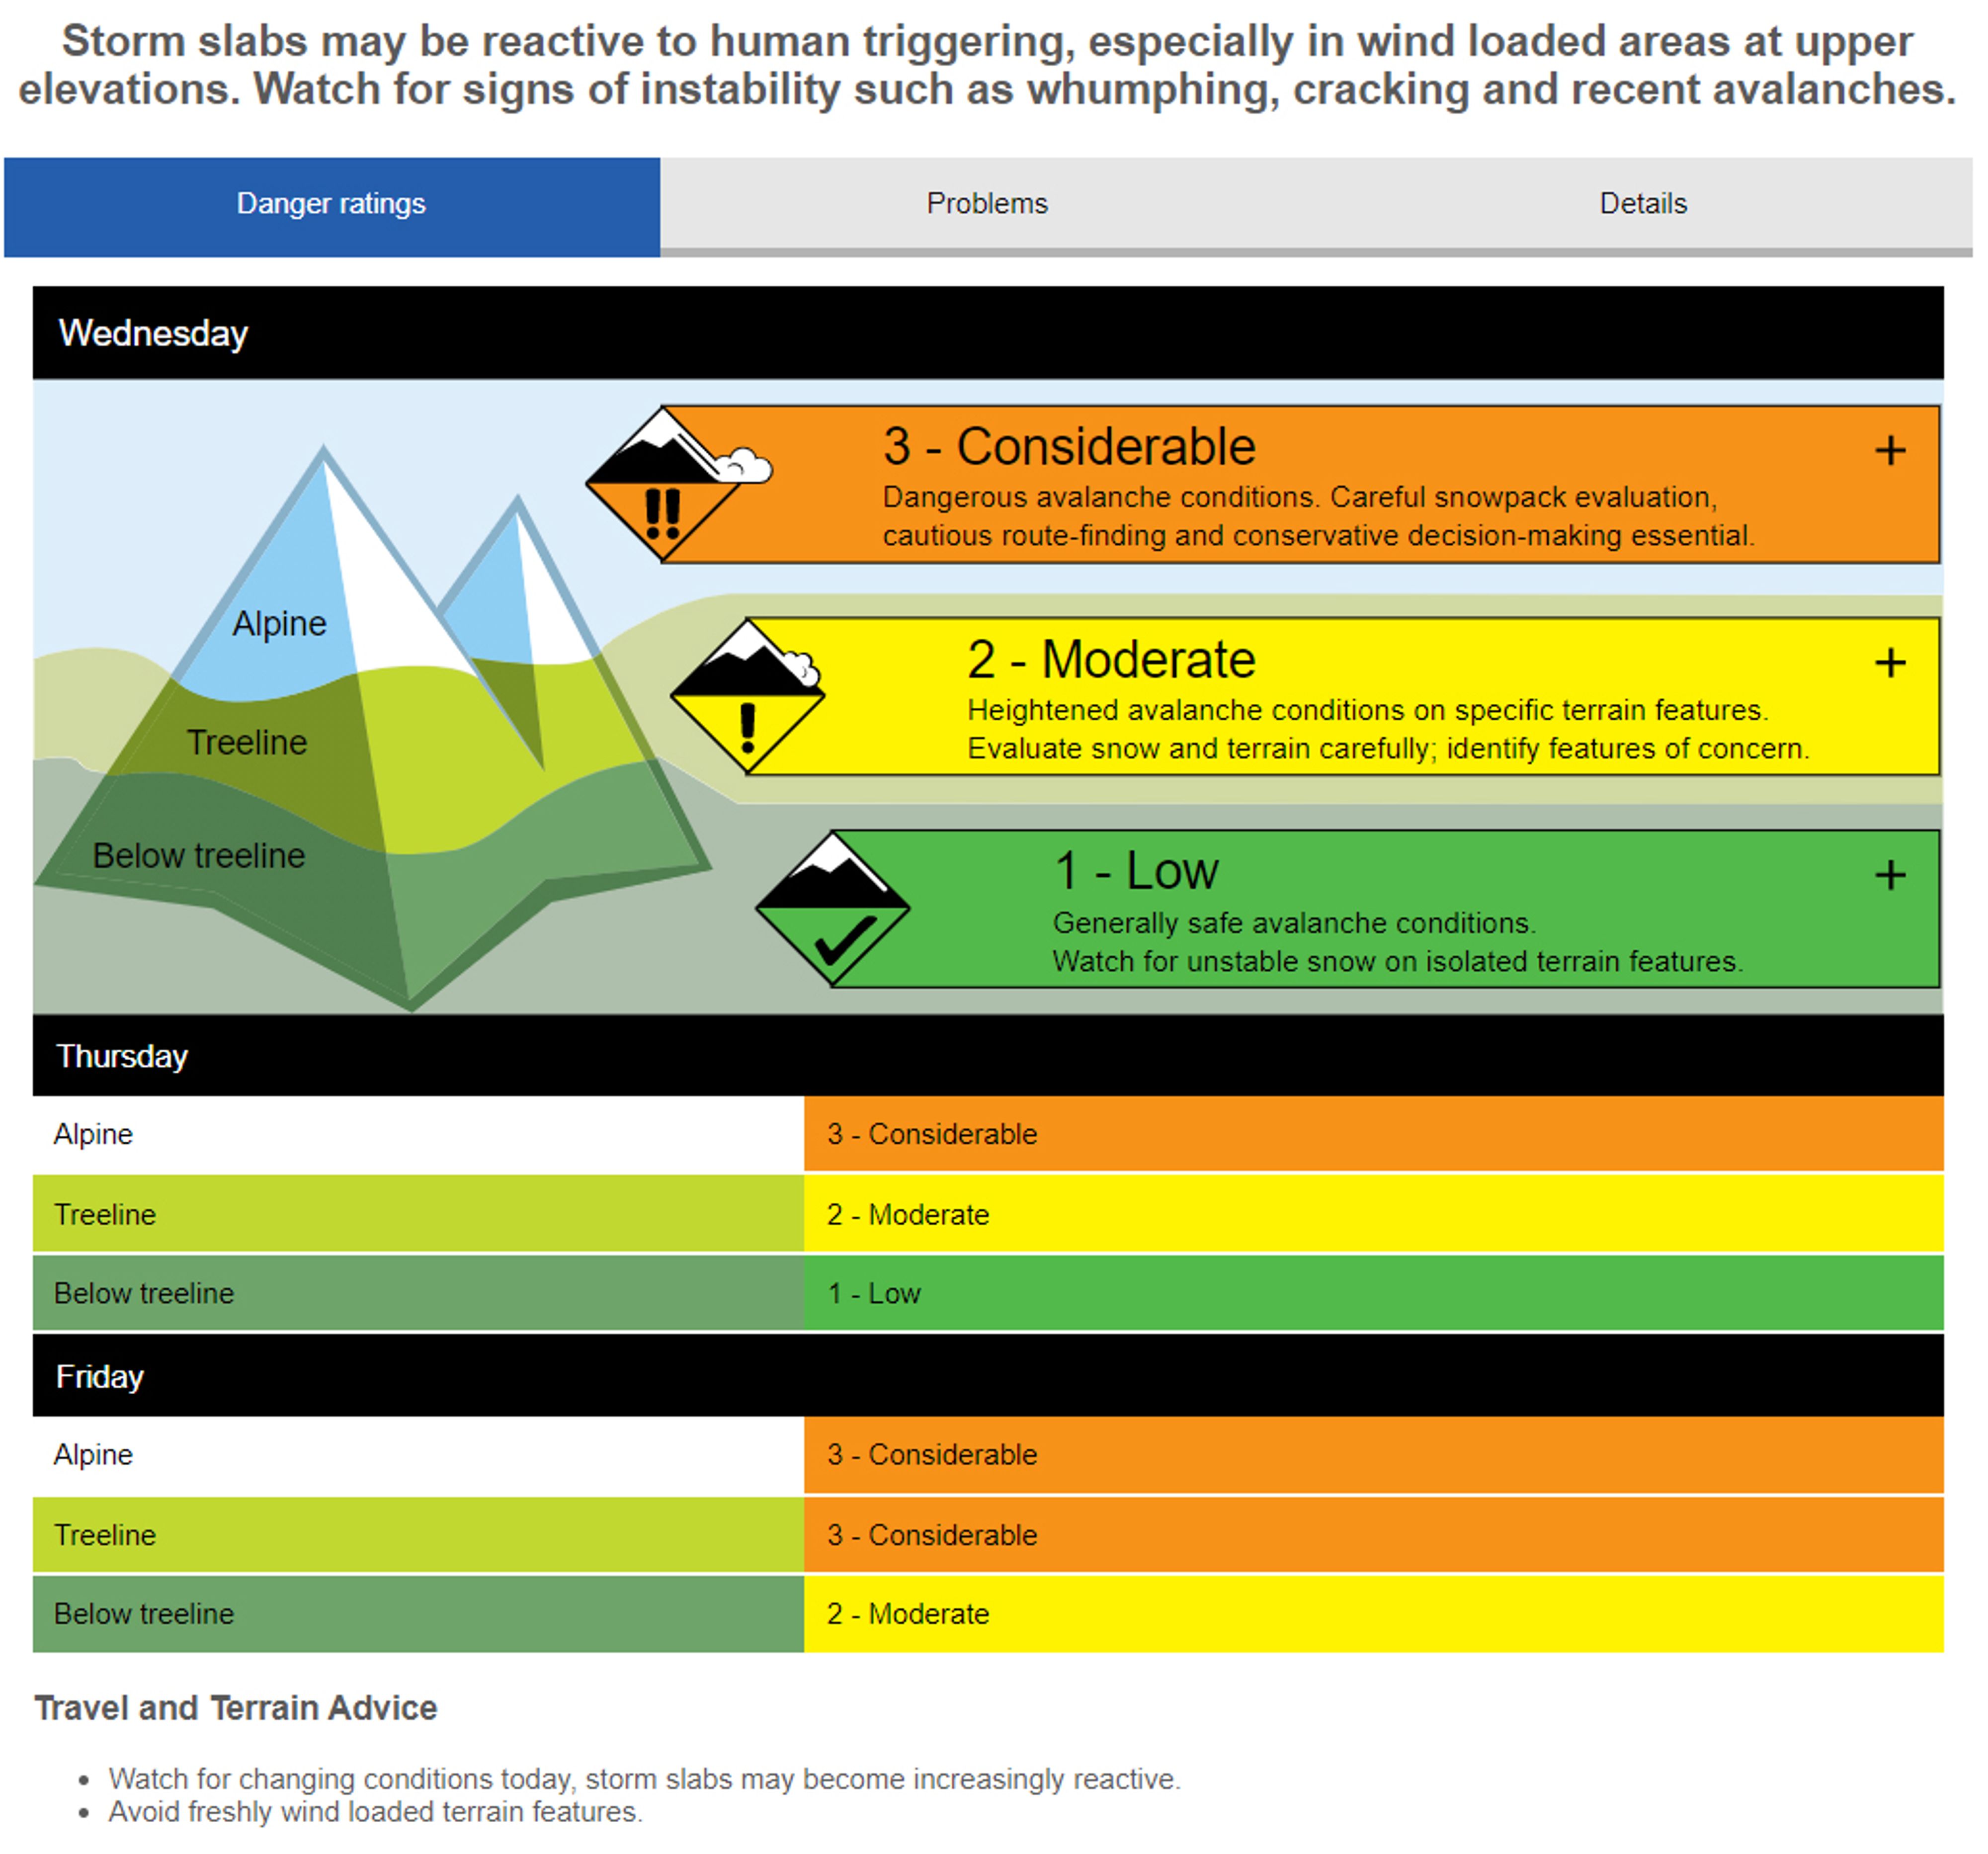 The front page of the avalanche forecast includes a brief introduction, danger ratings, and terrain and travel advice.